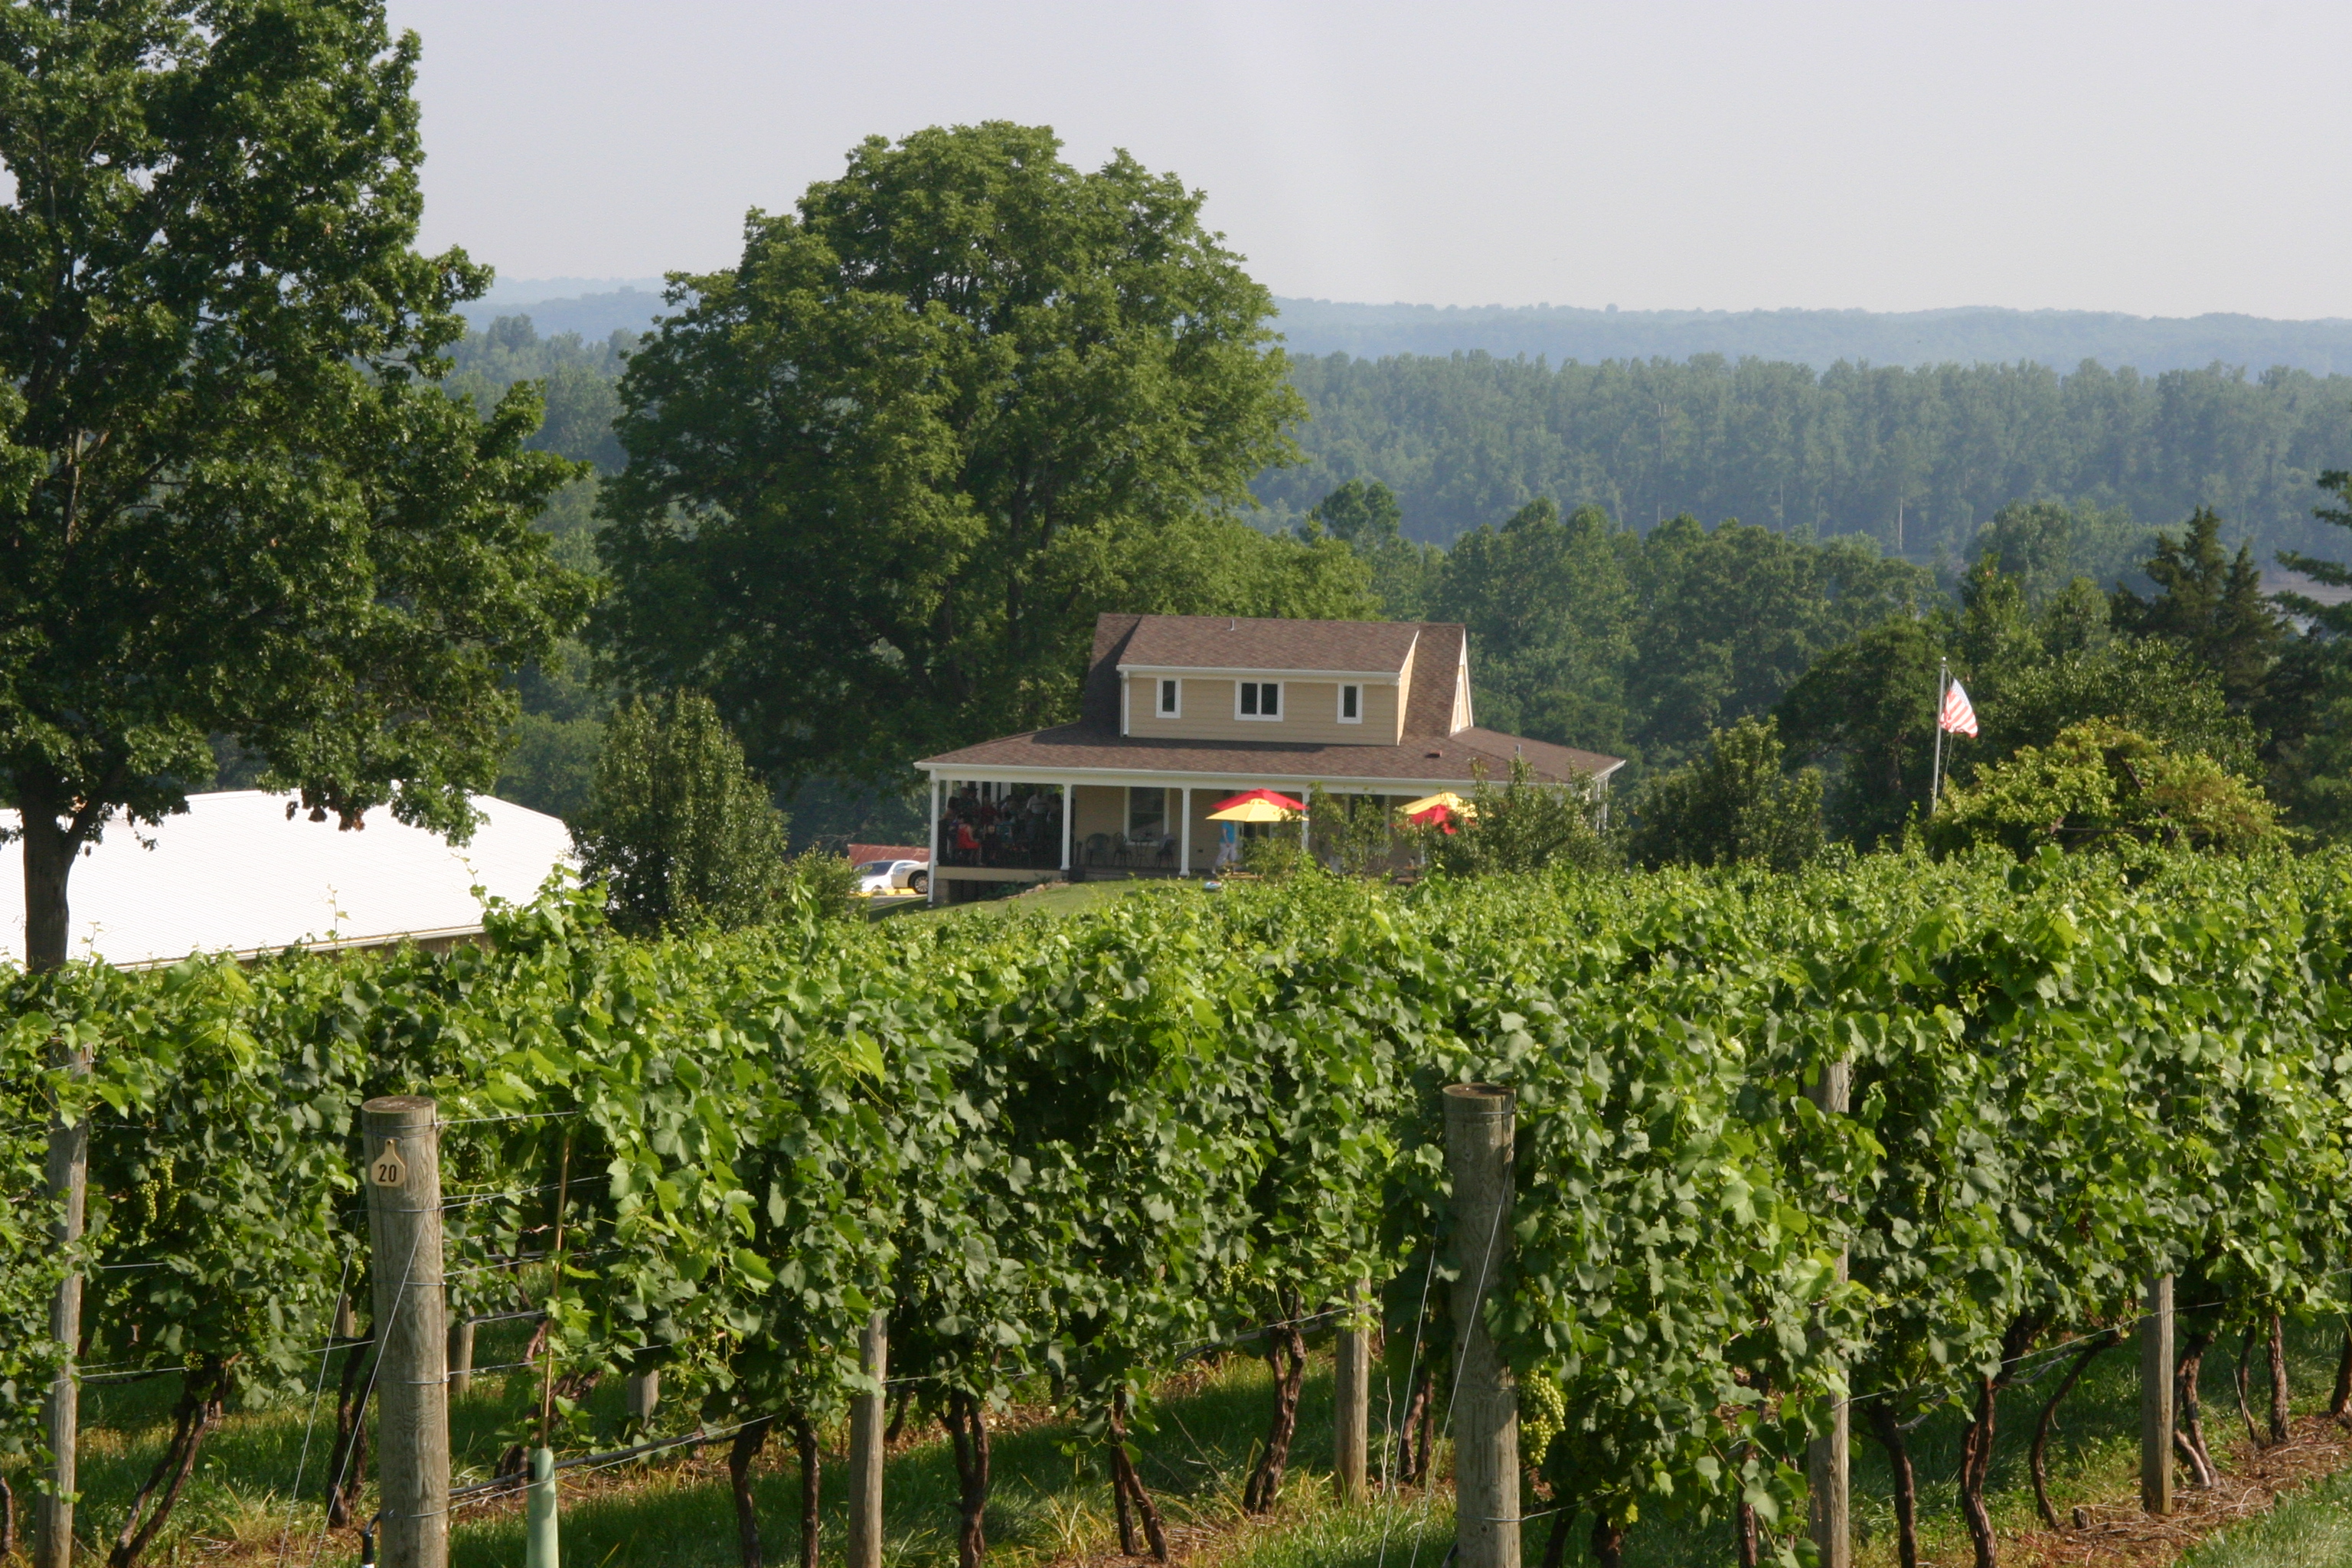 Lost Creek Vineyard - outdoor photo, daytime, of a large field of grapevines with a large building in the background.